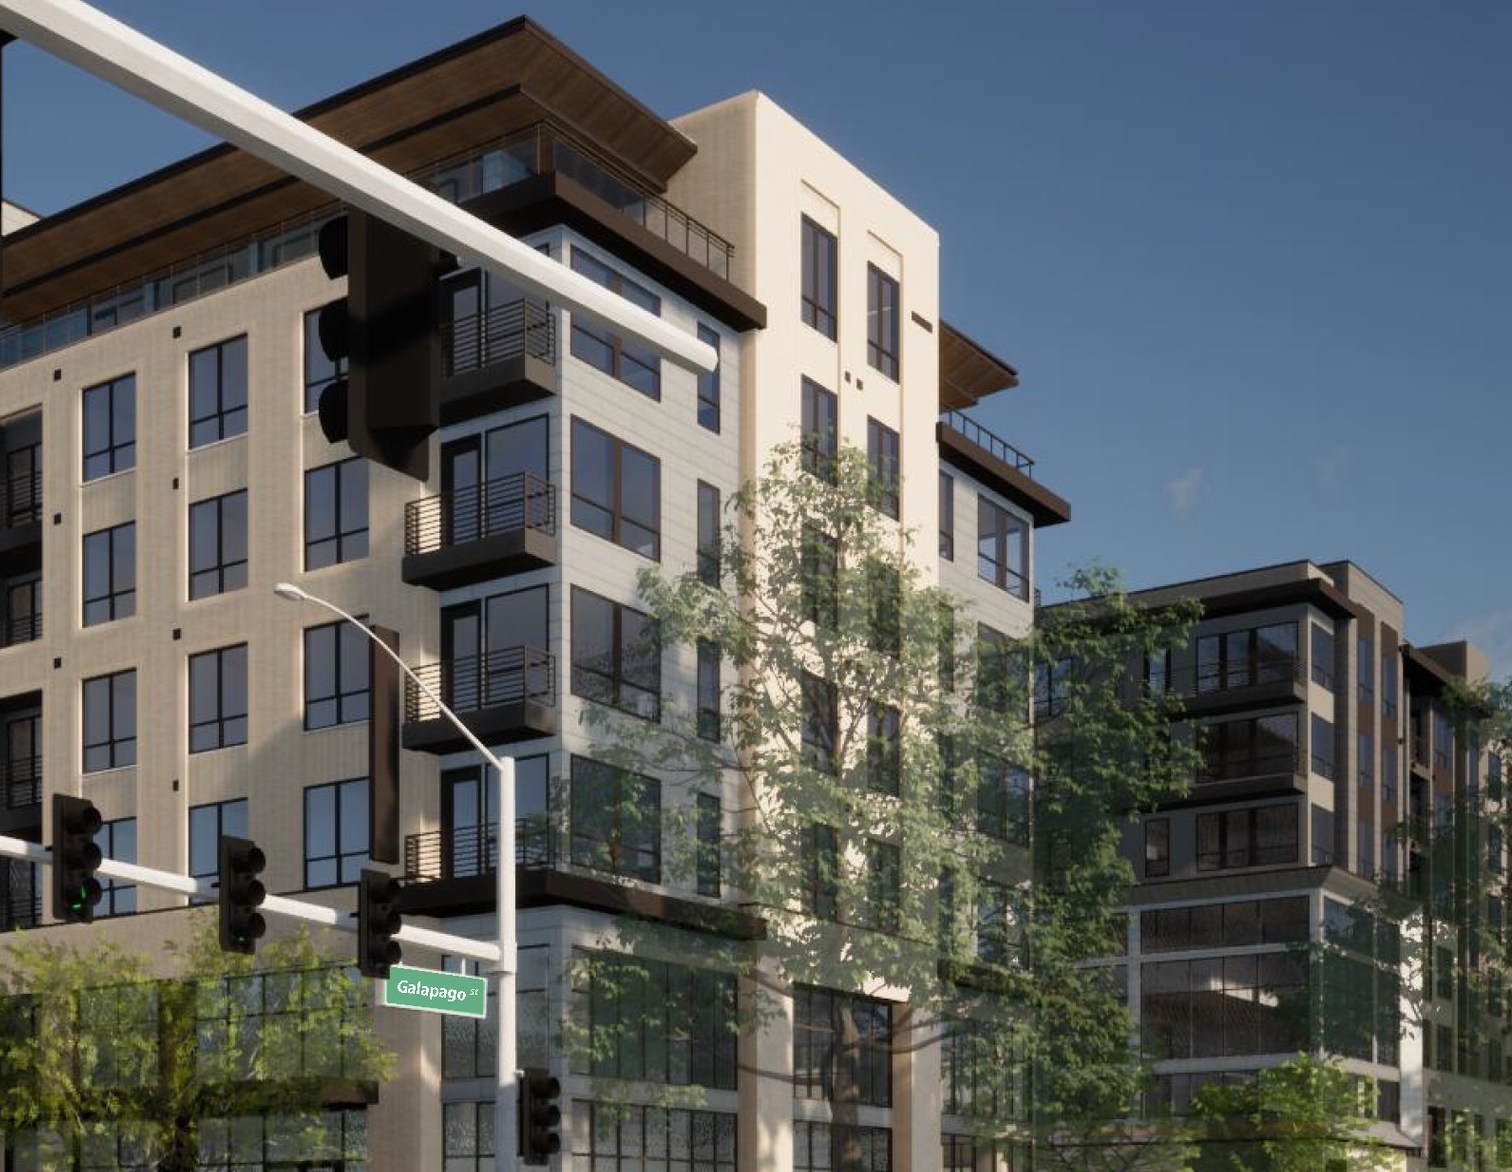 Embrey Acquires Land for Development of 370-Unit The Finch Apartment Community in Denver's Golden Triangle Creative District